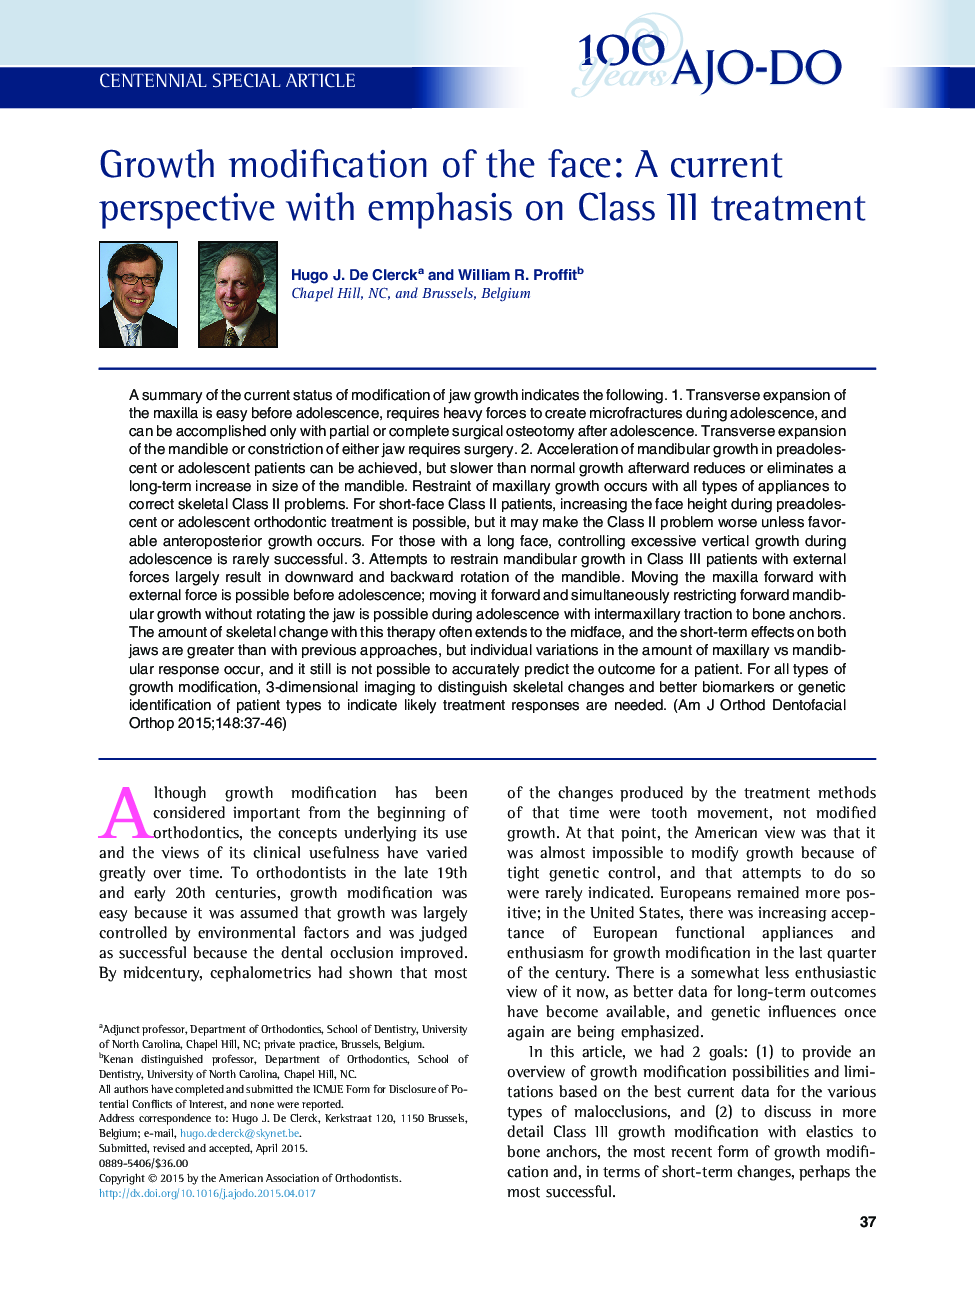 Growth modification of the face: A current perspective with emphasis on Class III treatment 